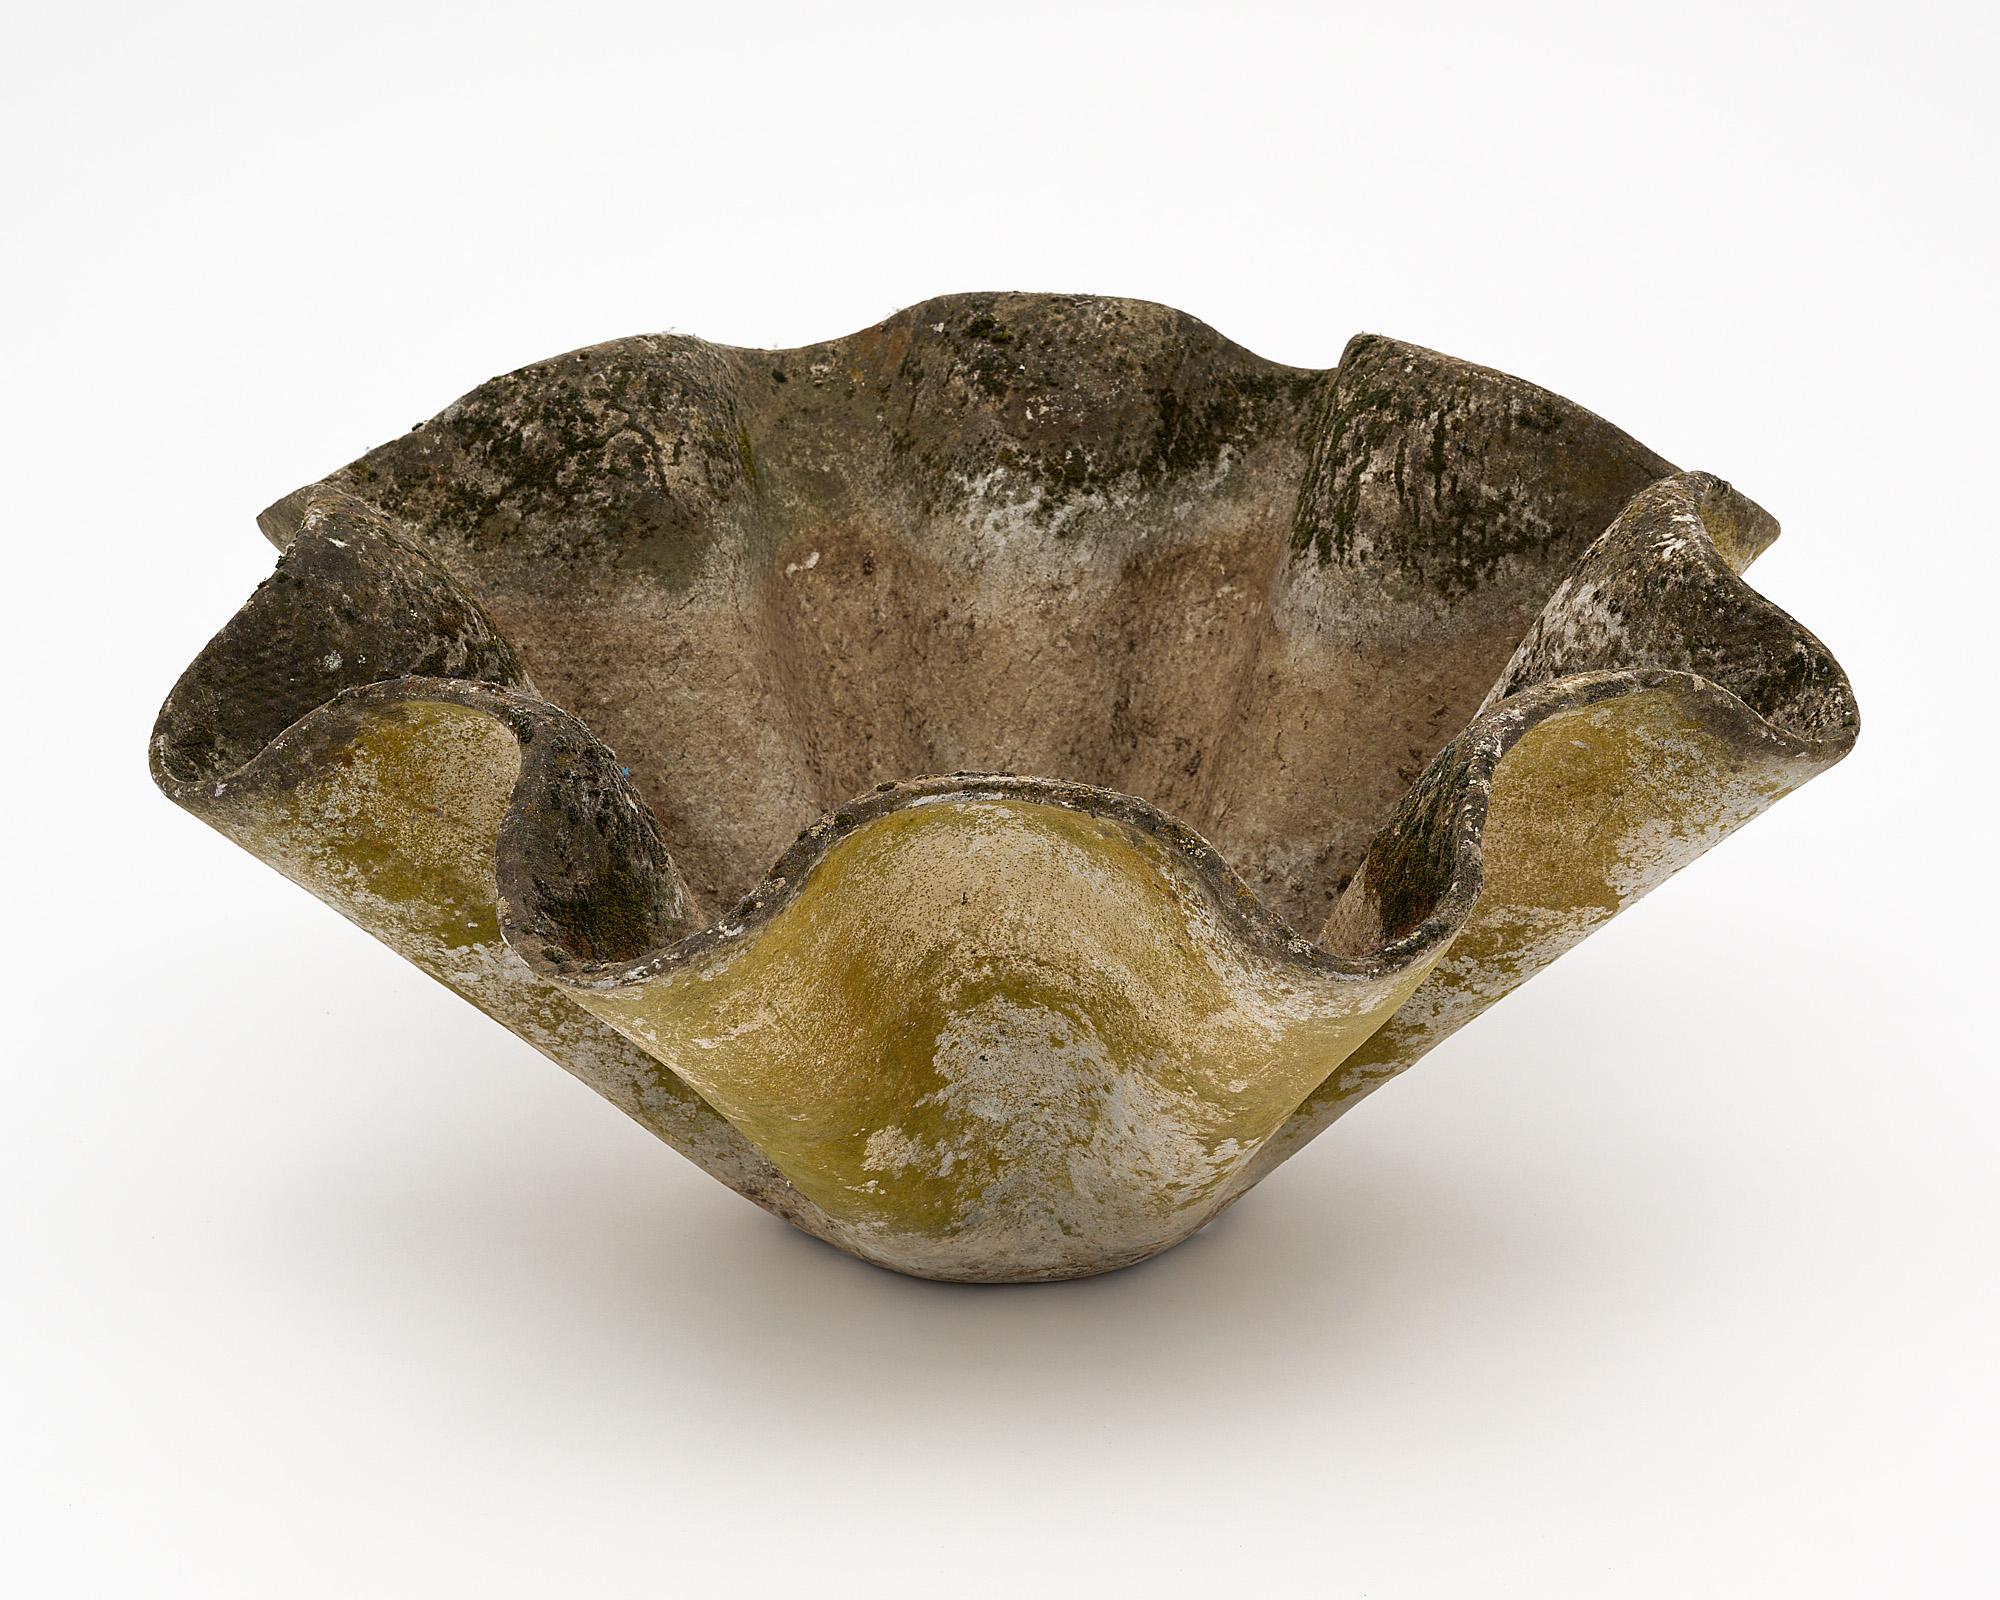 Jardiniere, from Switzerland, by Willy Guhl for Eternit, circa 1968. This piece is made of free form concrete with the original lichen and patina.